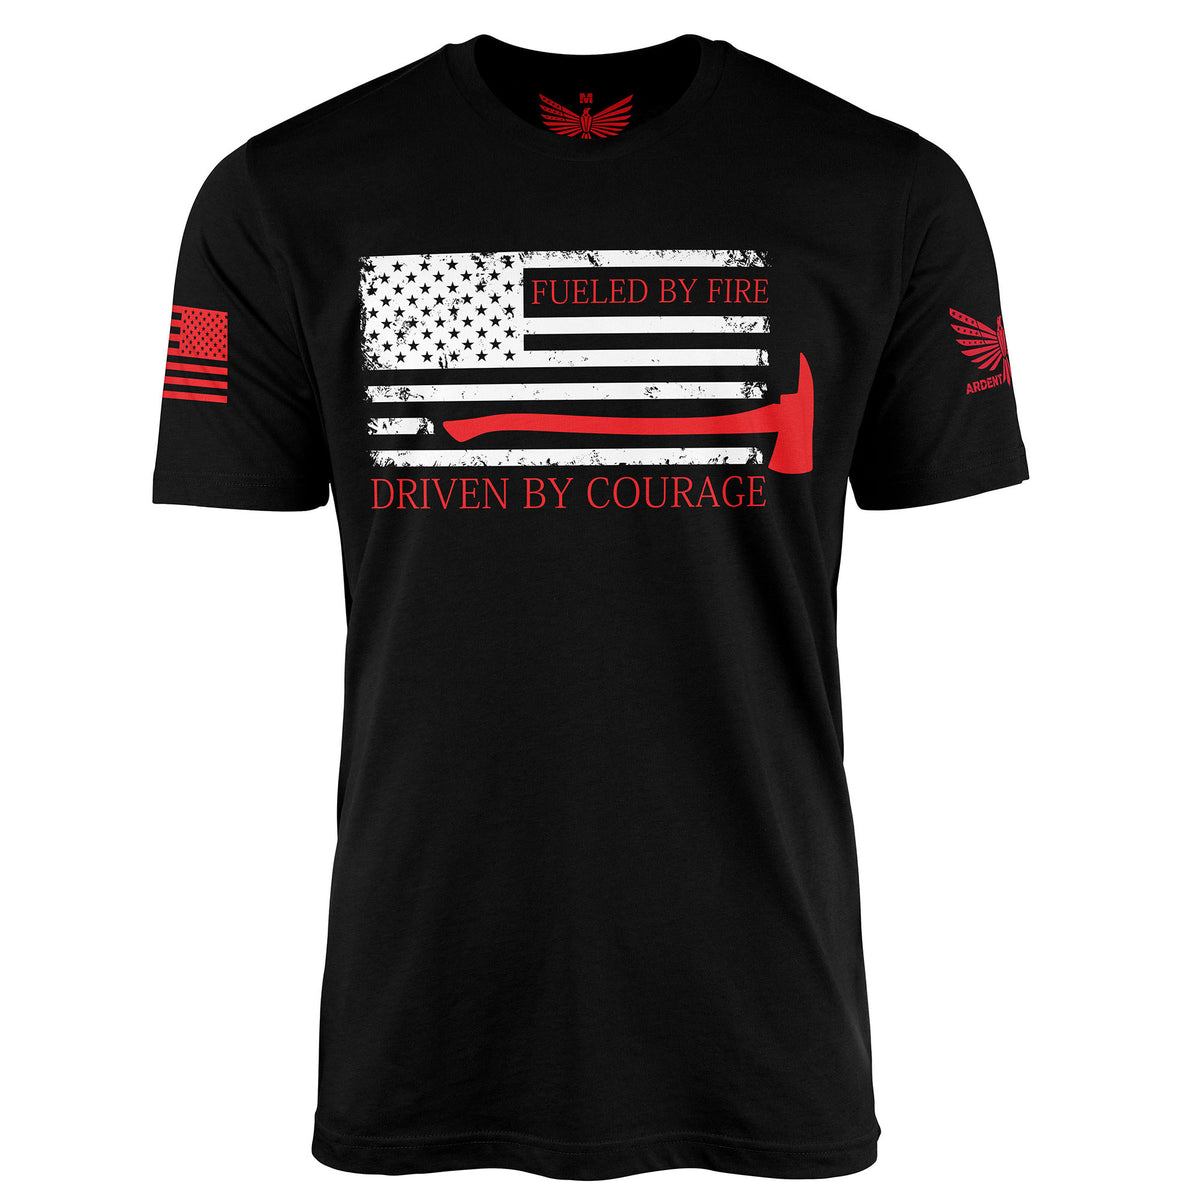 Fueled By Fire-Men&#39;s Shirt-S-Ardent Patriot Apparel Co.